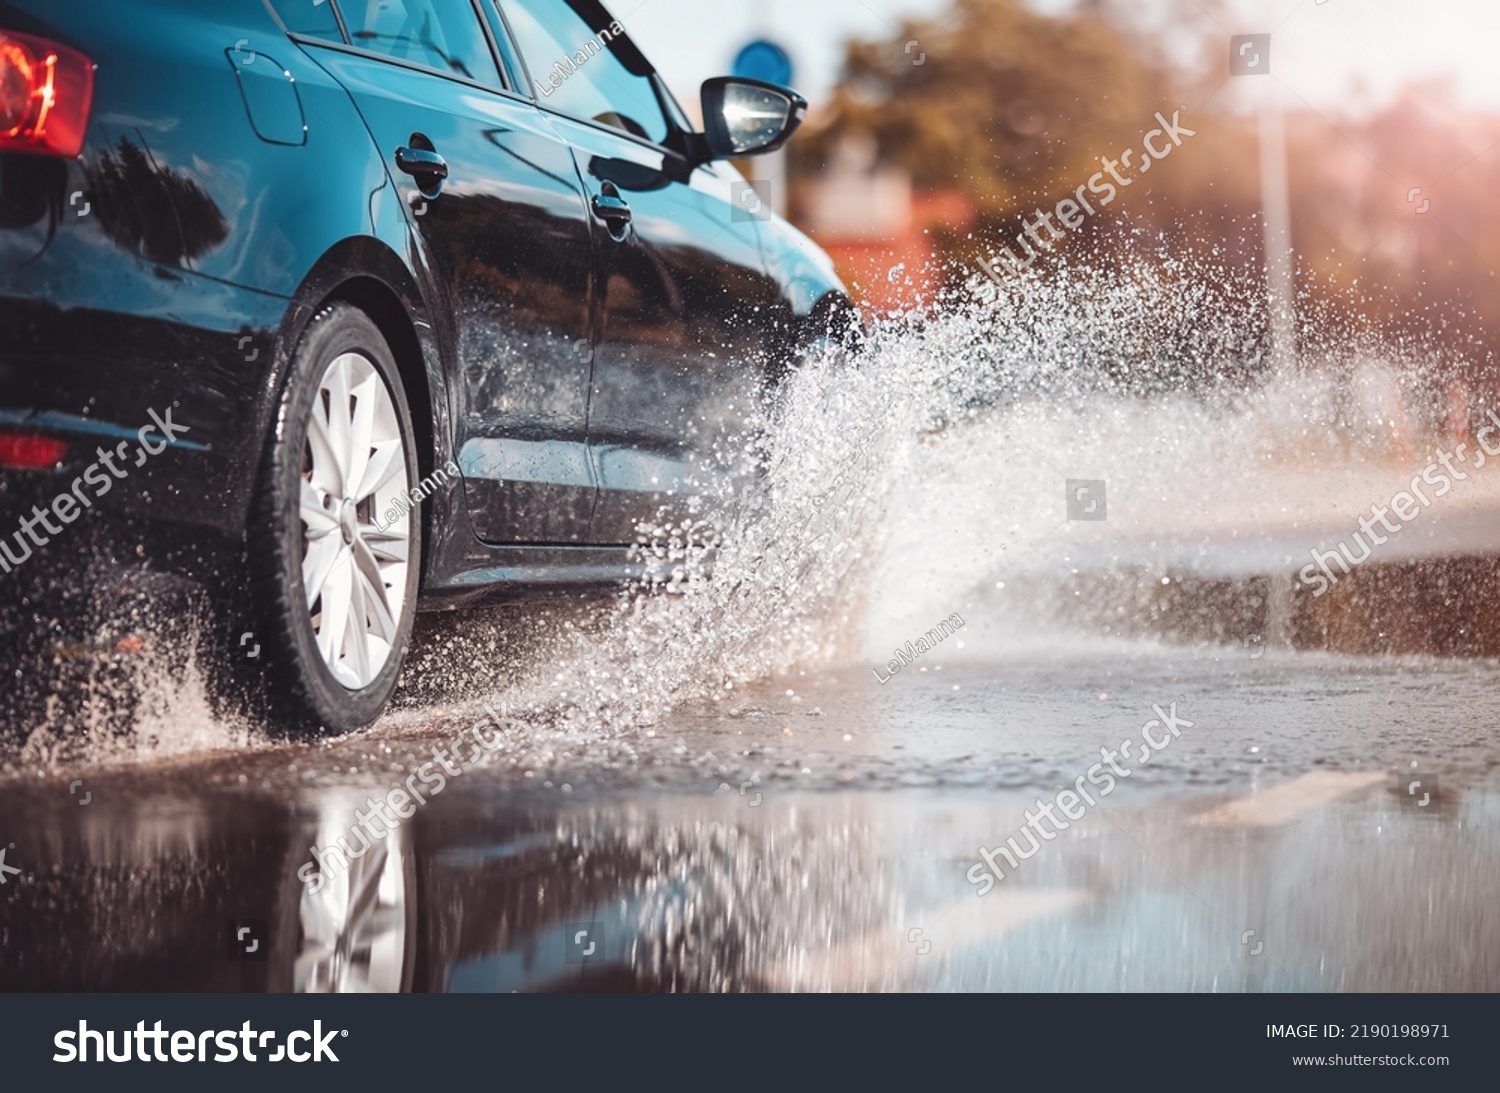 Car driving through the puddle and splashing by water. #2190198971